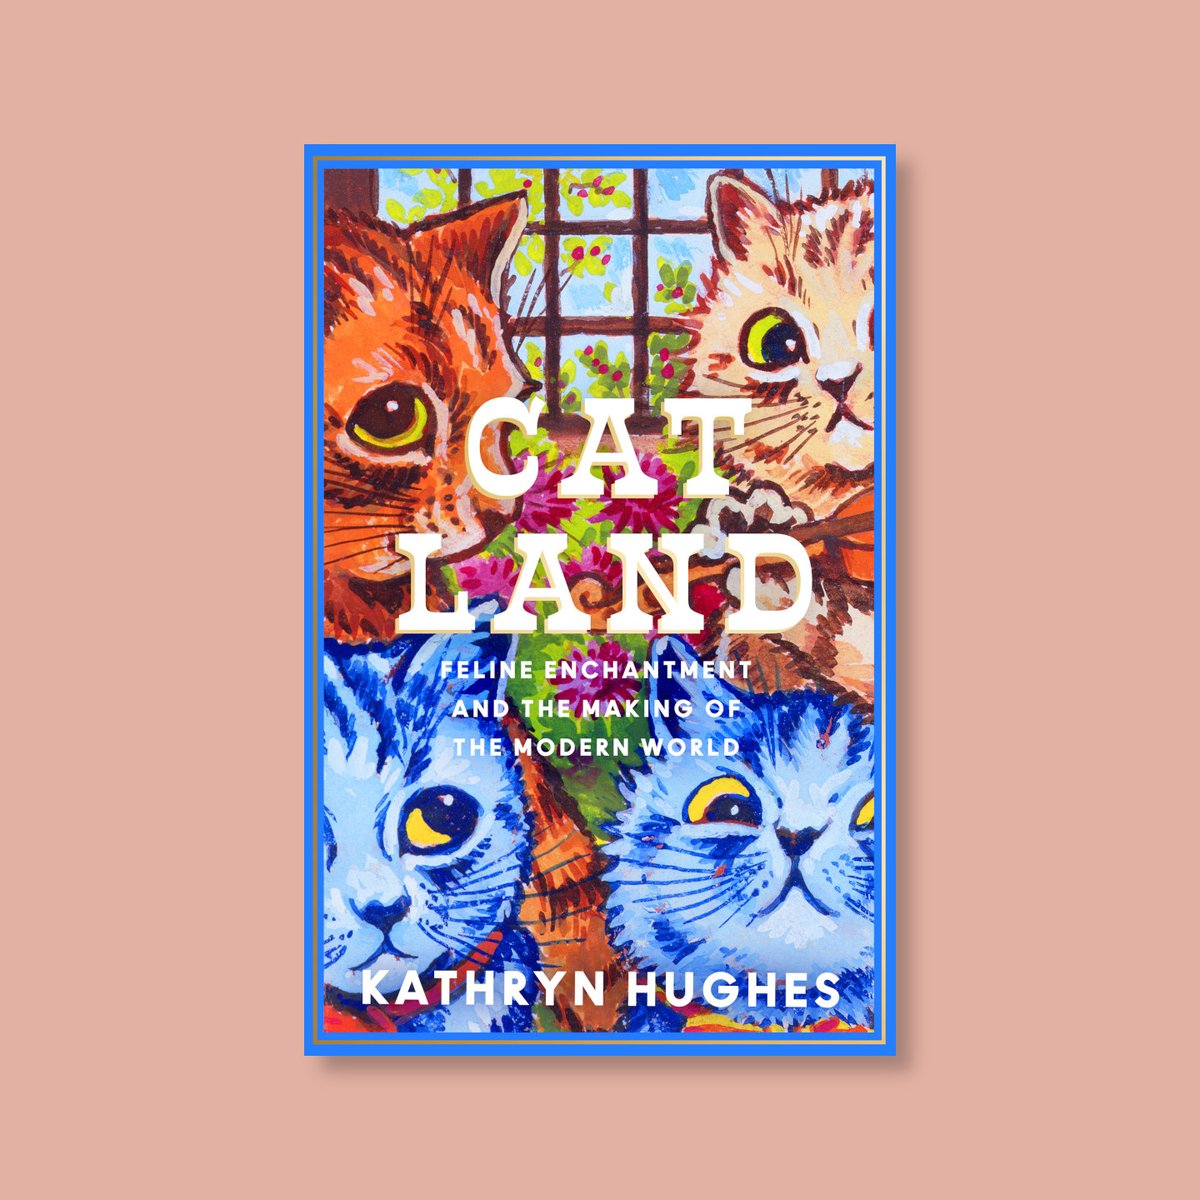 Kathryn Hughes’s new book ​CATLAND reveals the extraordinary story of the Edwardian revolution in our relationship with cats and the role of Louis Wain and his popular cat-based art in ushering in the age of the cat Read an extract on our blog: lrb.me/uu3